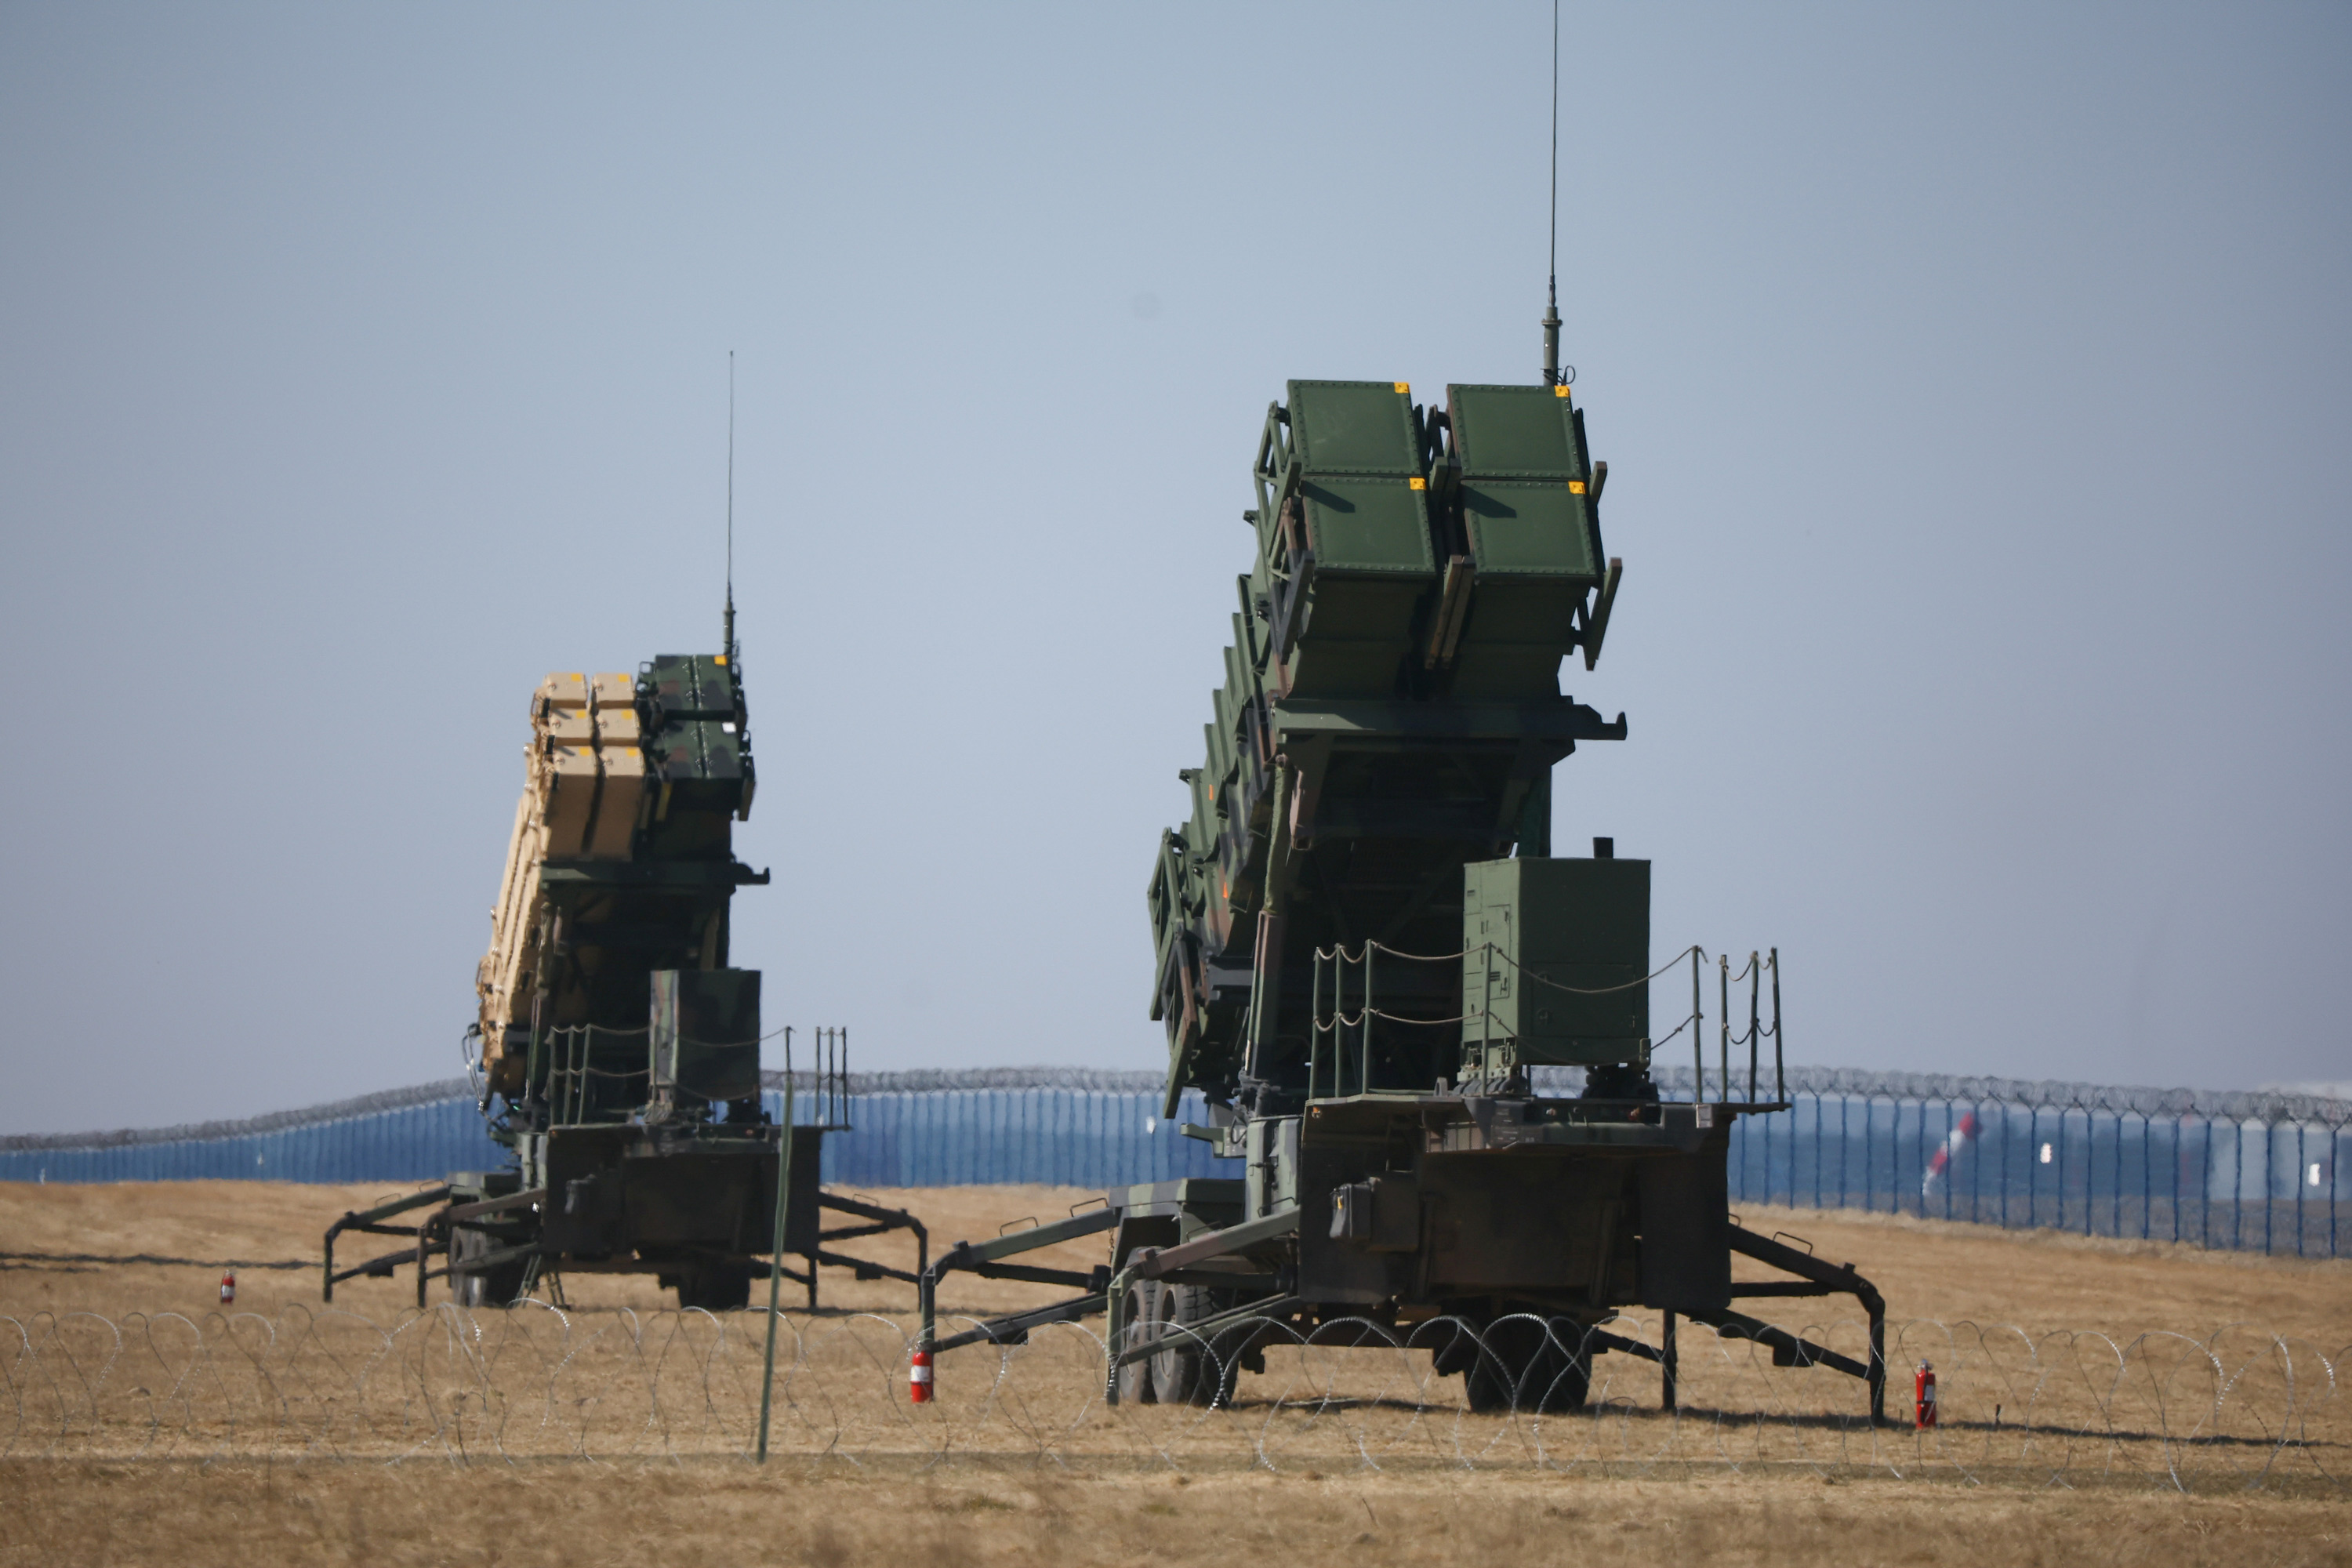 U.S. Army MIM-104 Patriots, surface-to-air missile (SAM) system launchers, are pictured at Rzeszow-Jasionka Airport, amid Russia's invasion of Ukraine, Poland on March 24, 2022.